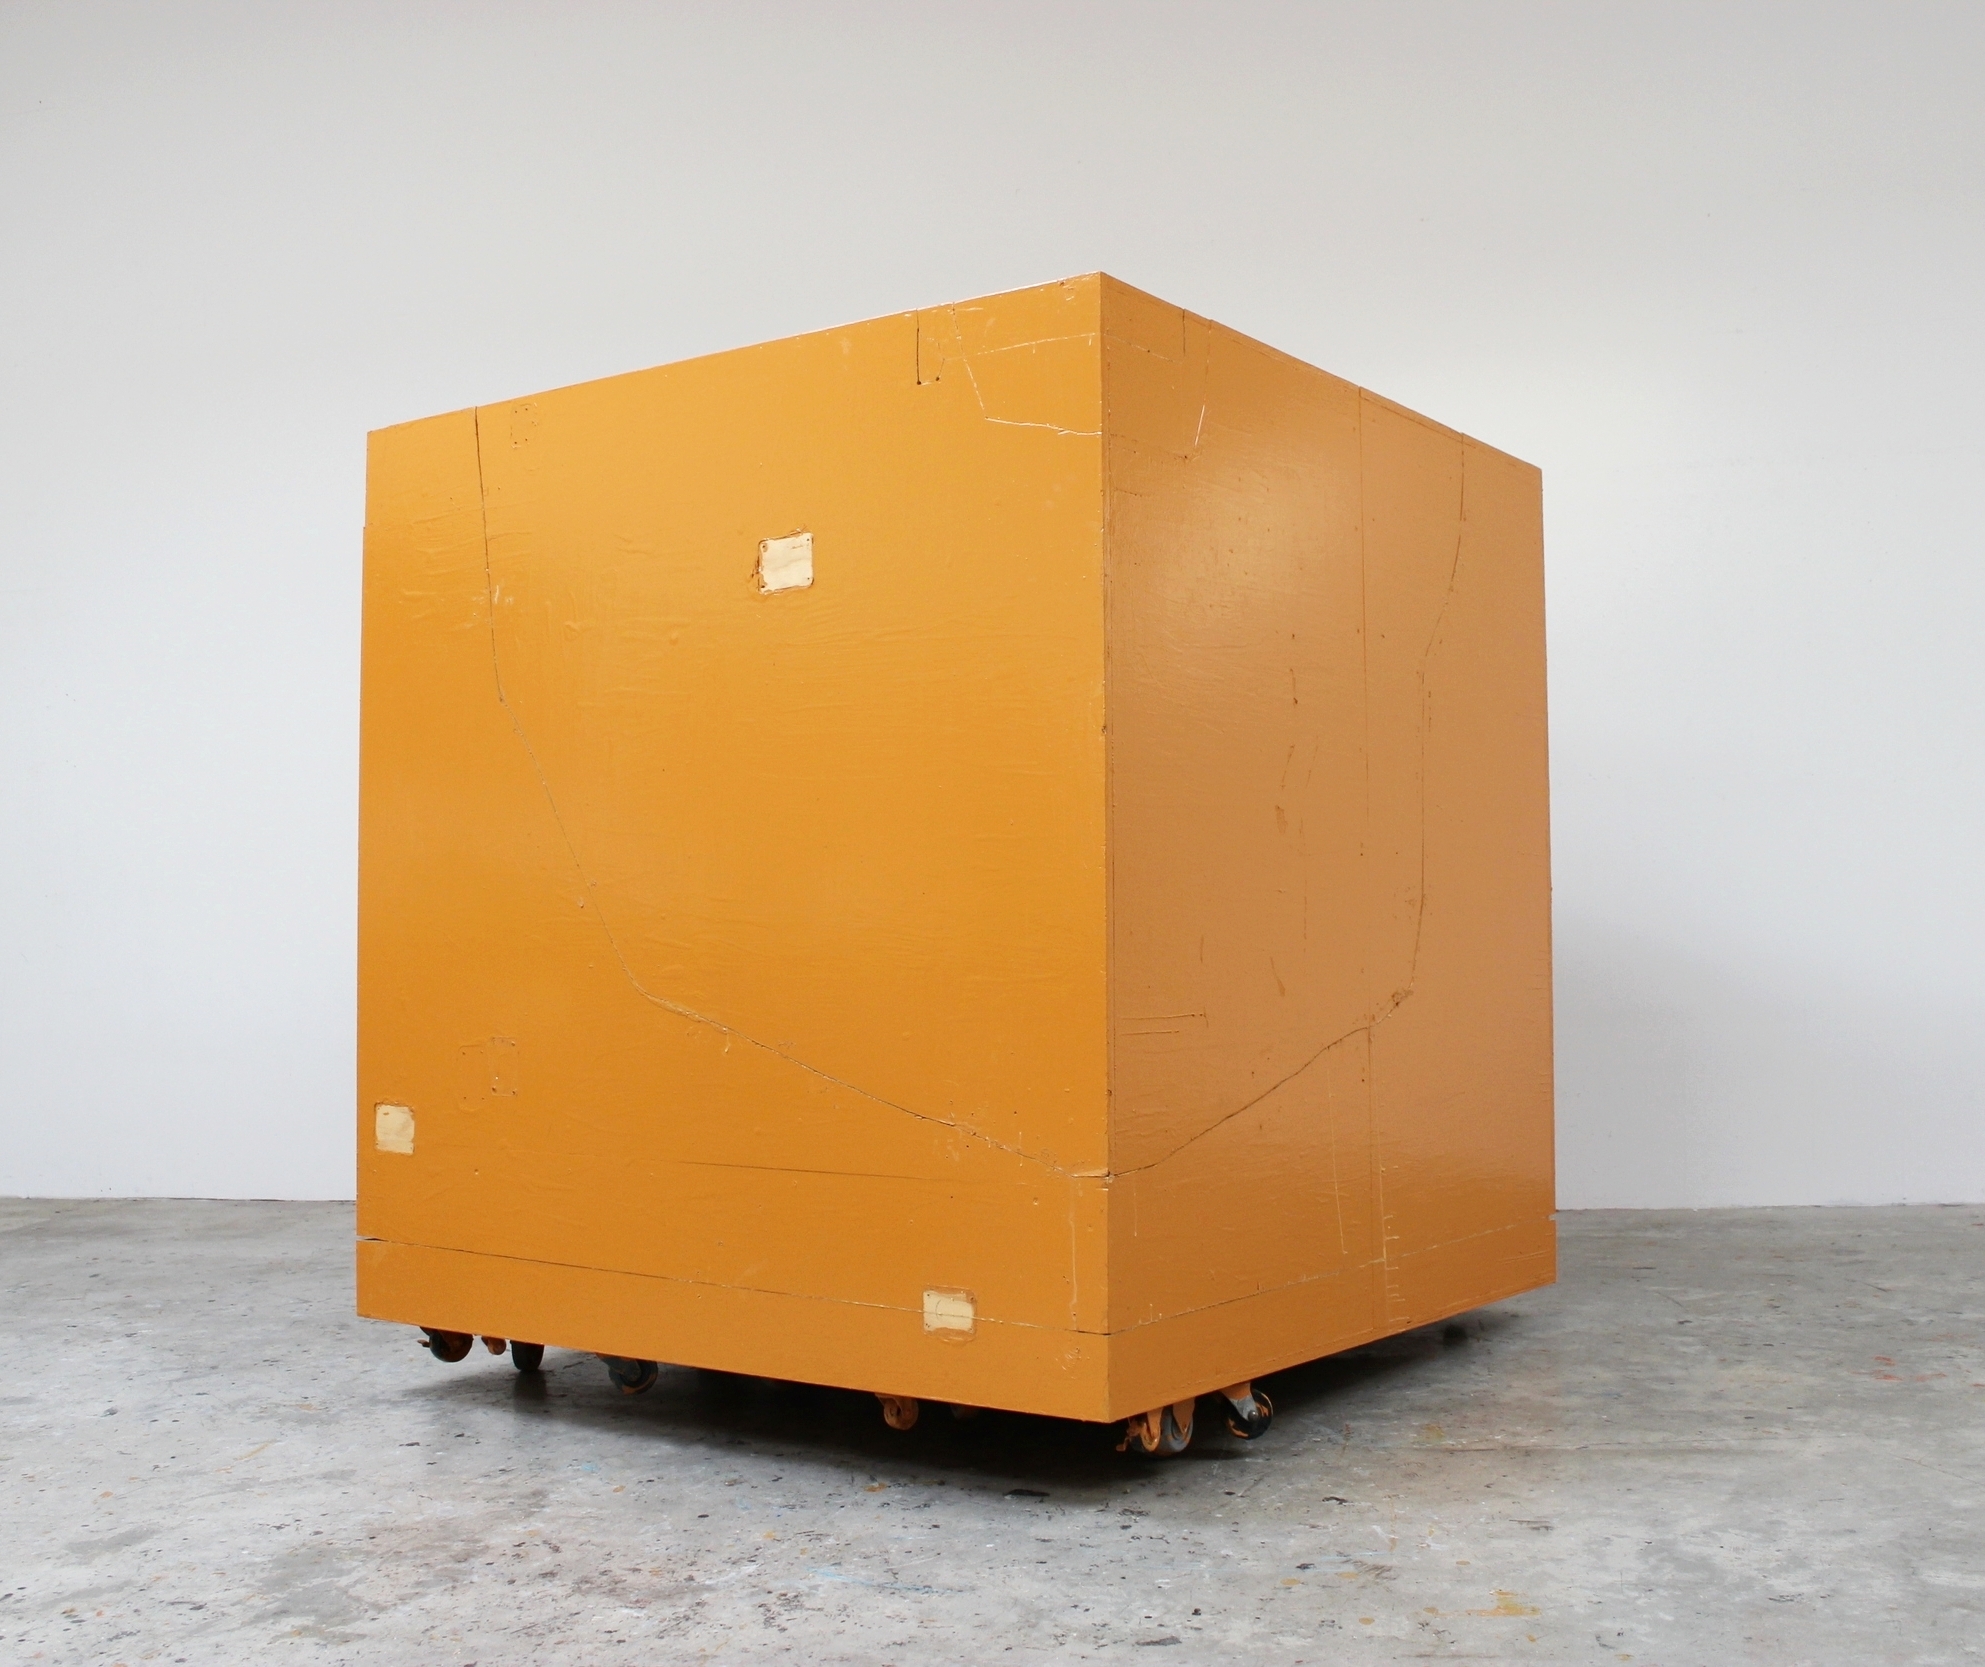  Rolling Platform (Cube) 2010 66 x 60 x 60 inches 